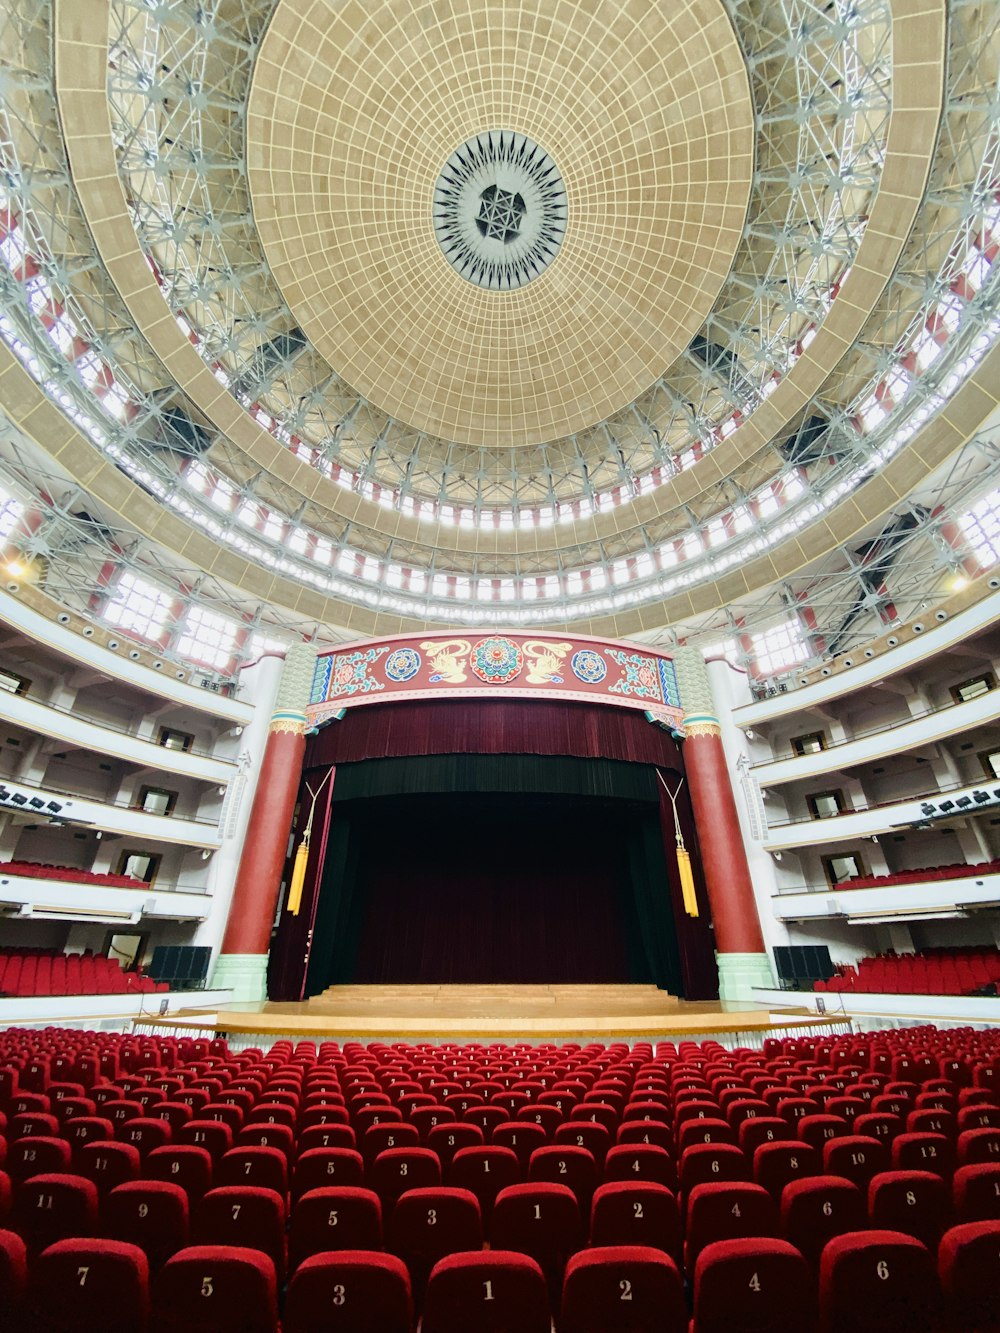 a large auditorium with red seats and a domed ceiling